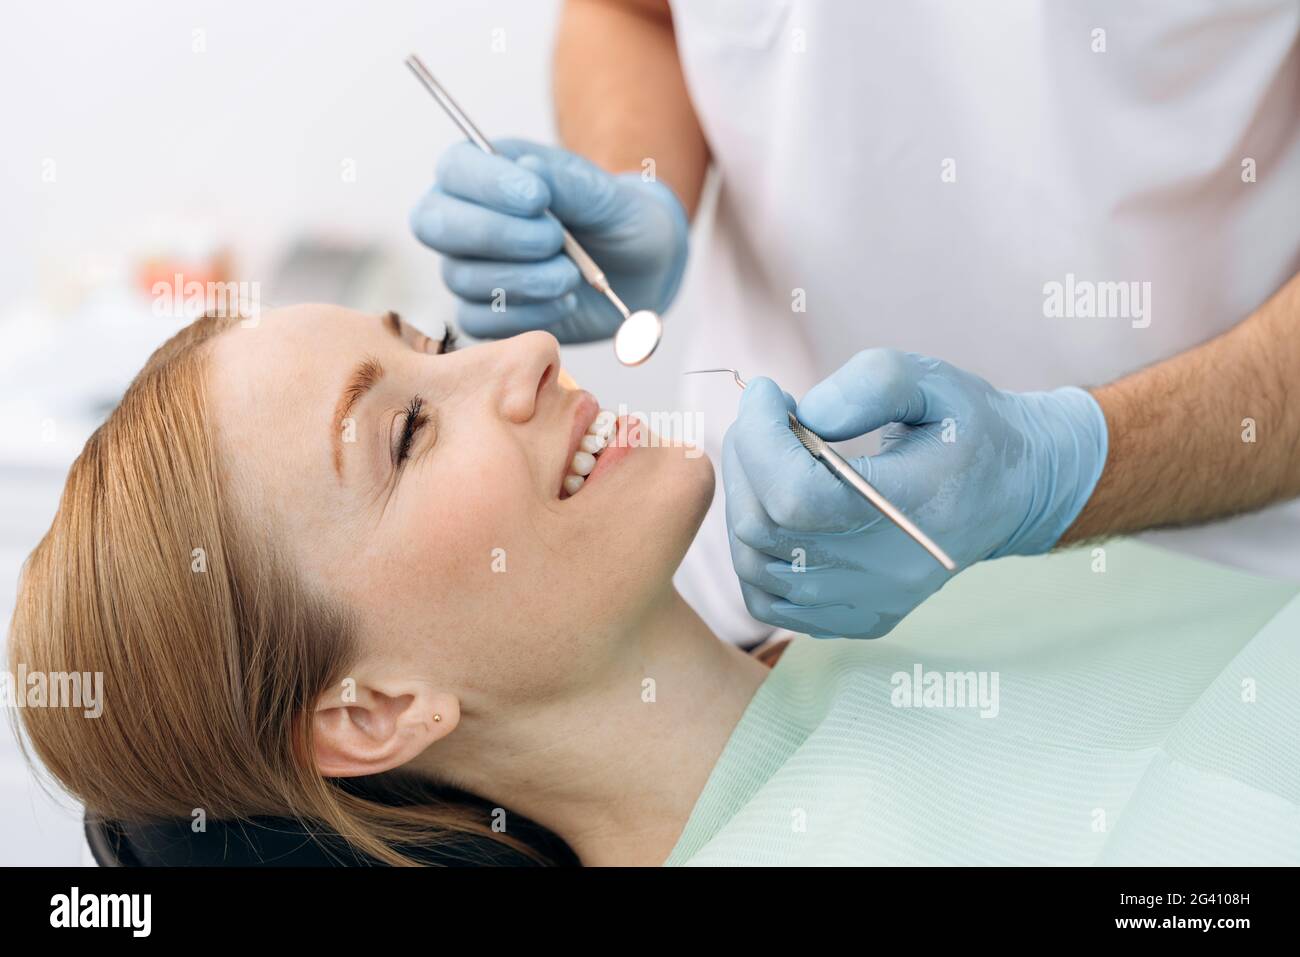 Attractive, charming woman sitting in a dental chair. The dentist examines the teeth with the help of dental instruments Stock Photo